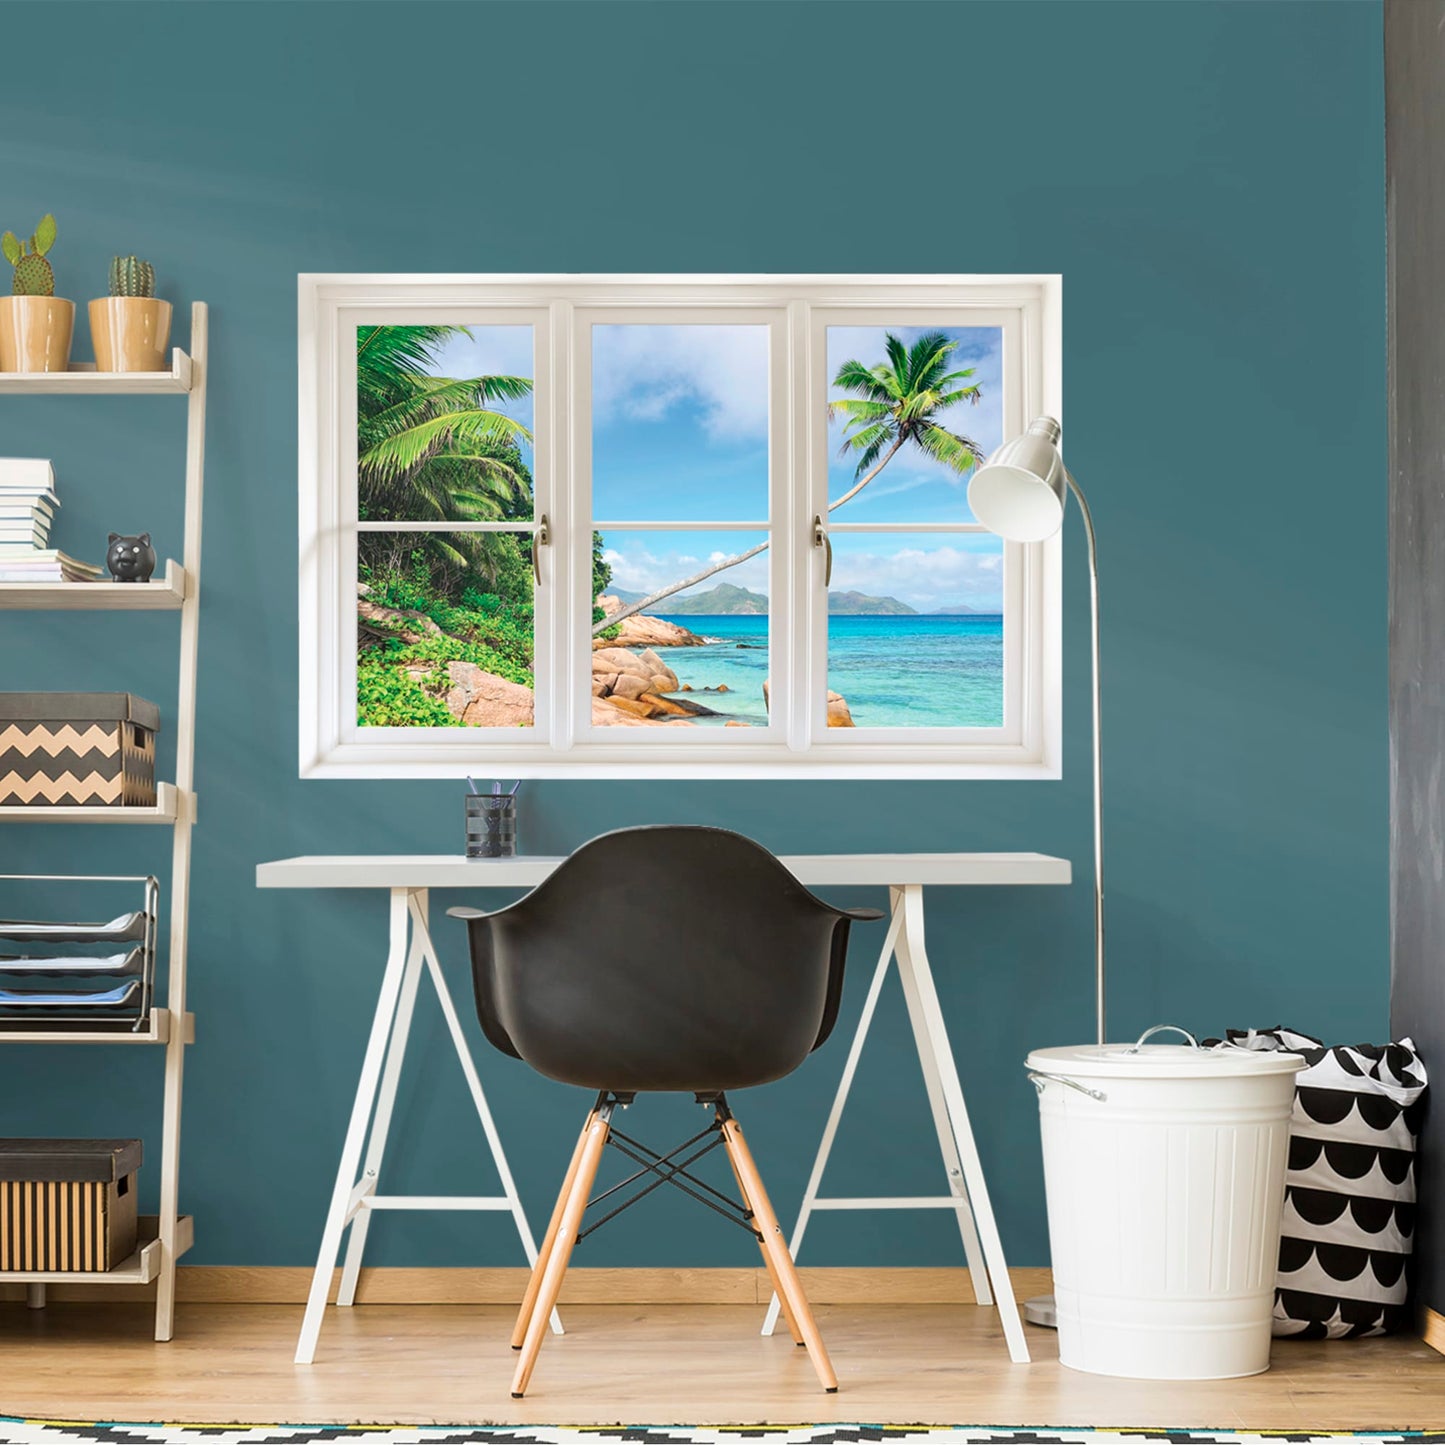 Instant Window: Tropical Beach, Seychelles - Removable Wall Graphic